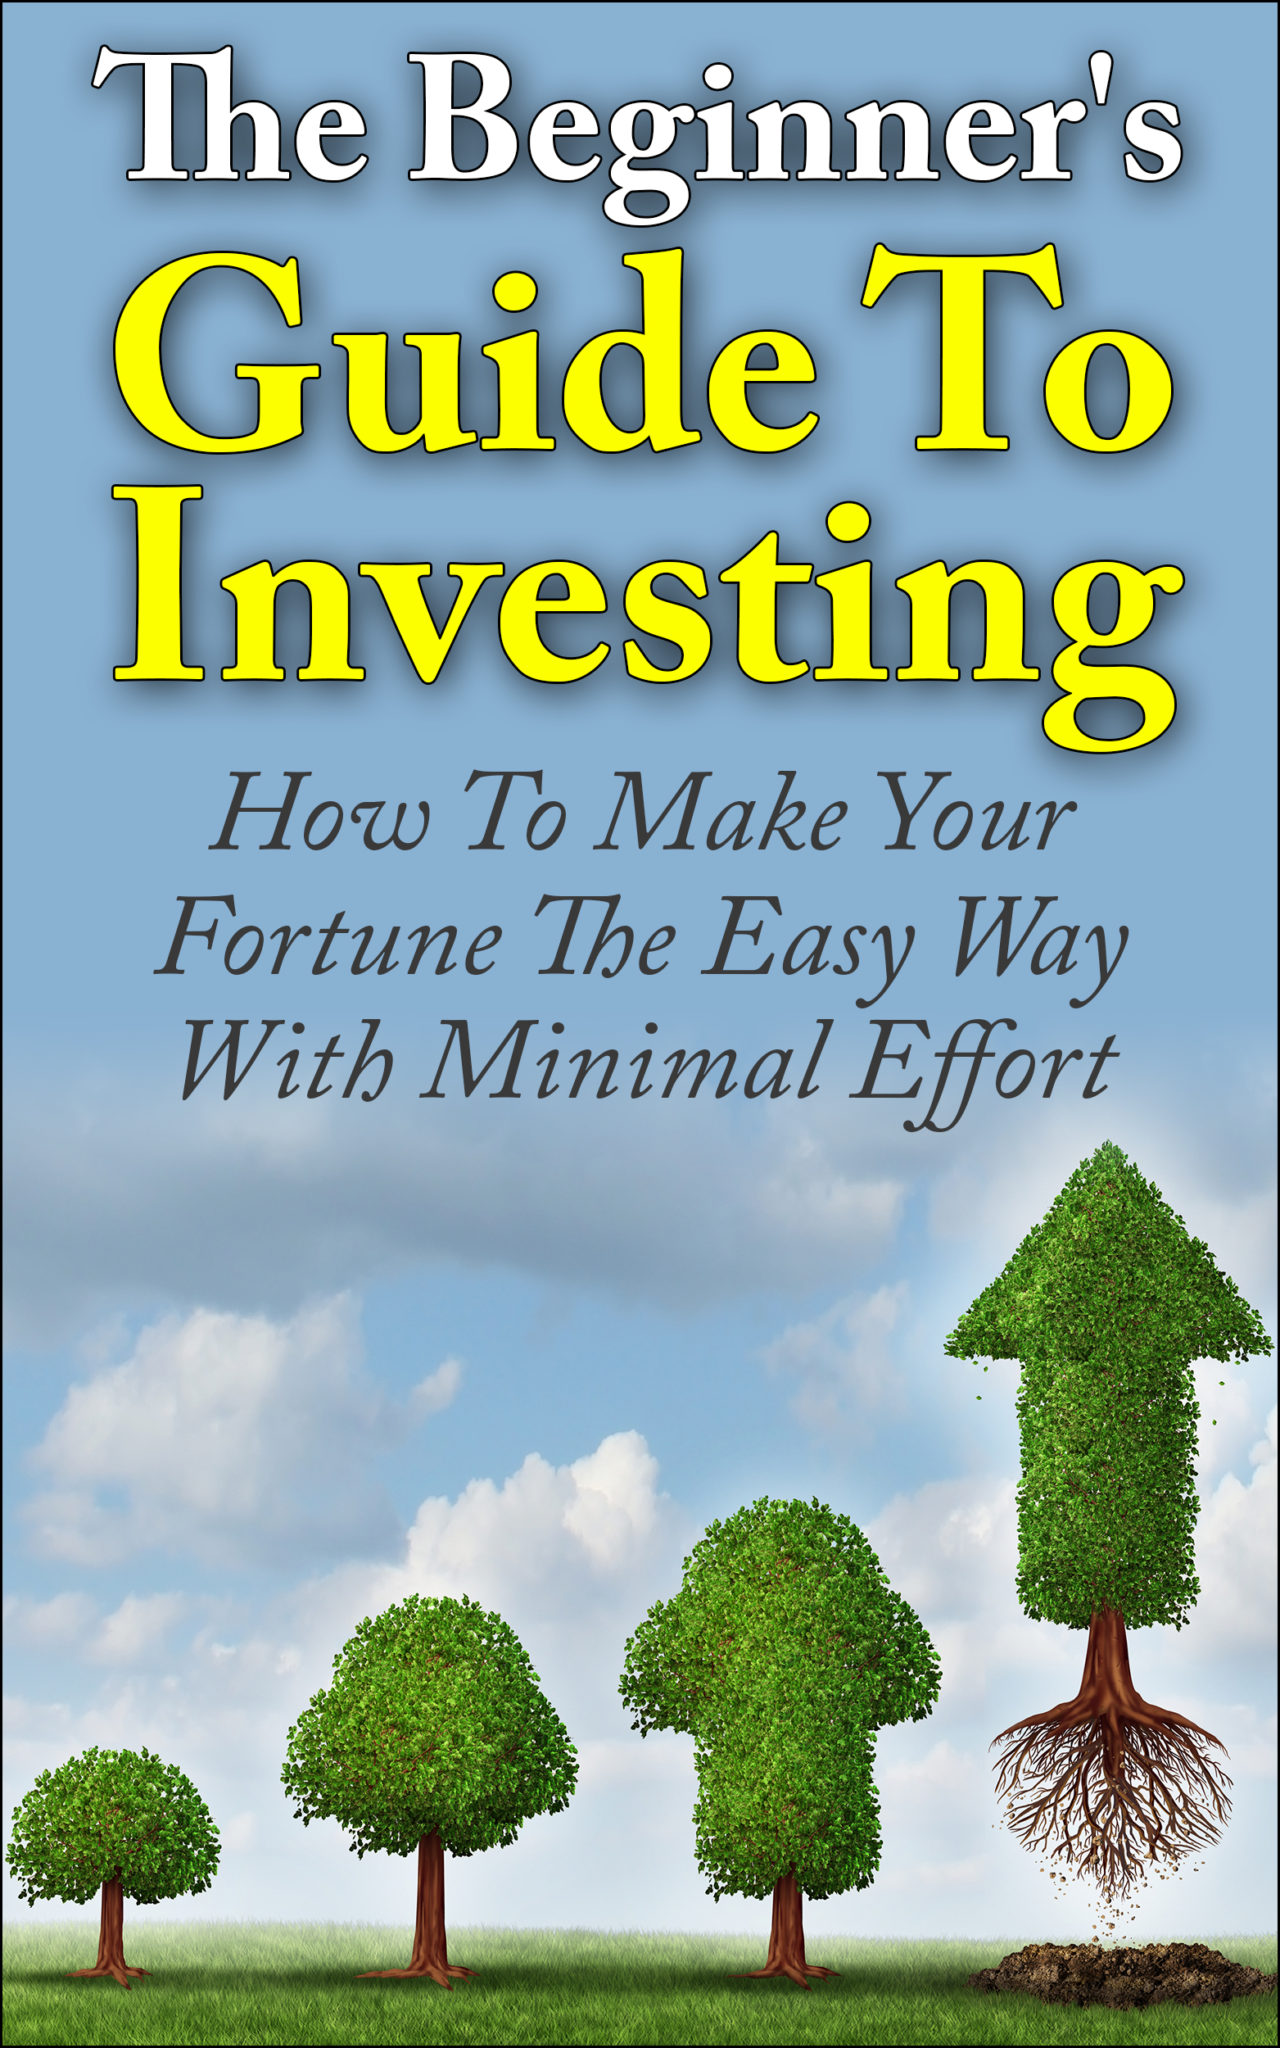 The Beginner’s Guide To Investing – How To Make Your Fortune The Easy Way With Minimal Effort by Daniel Keller